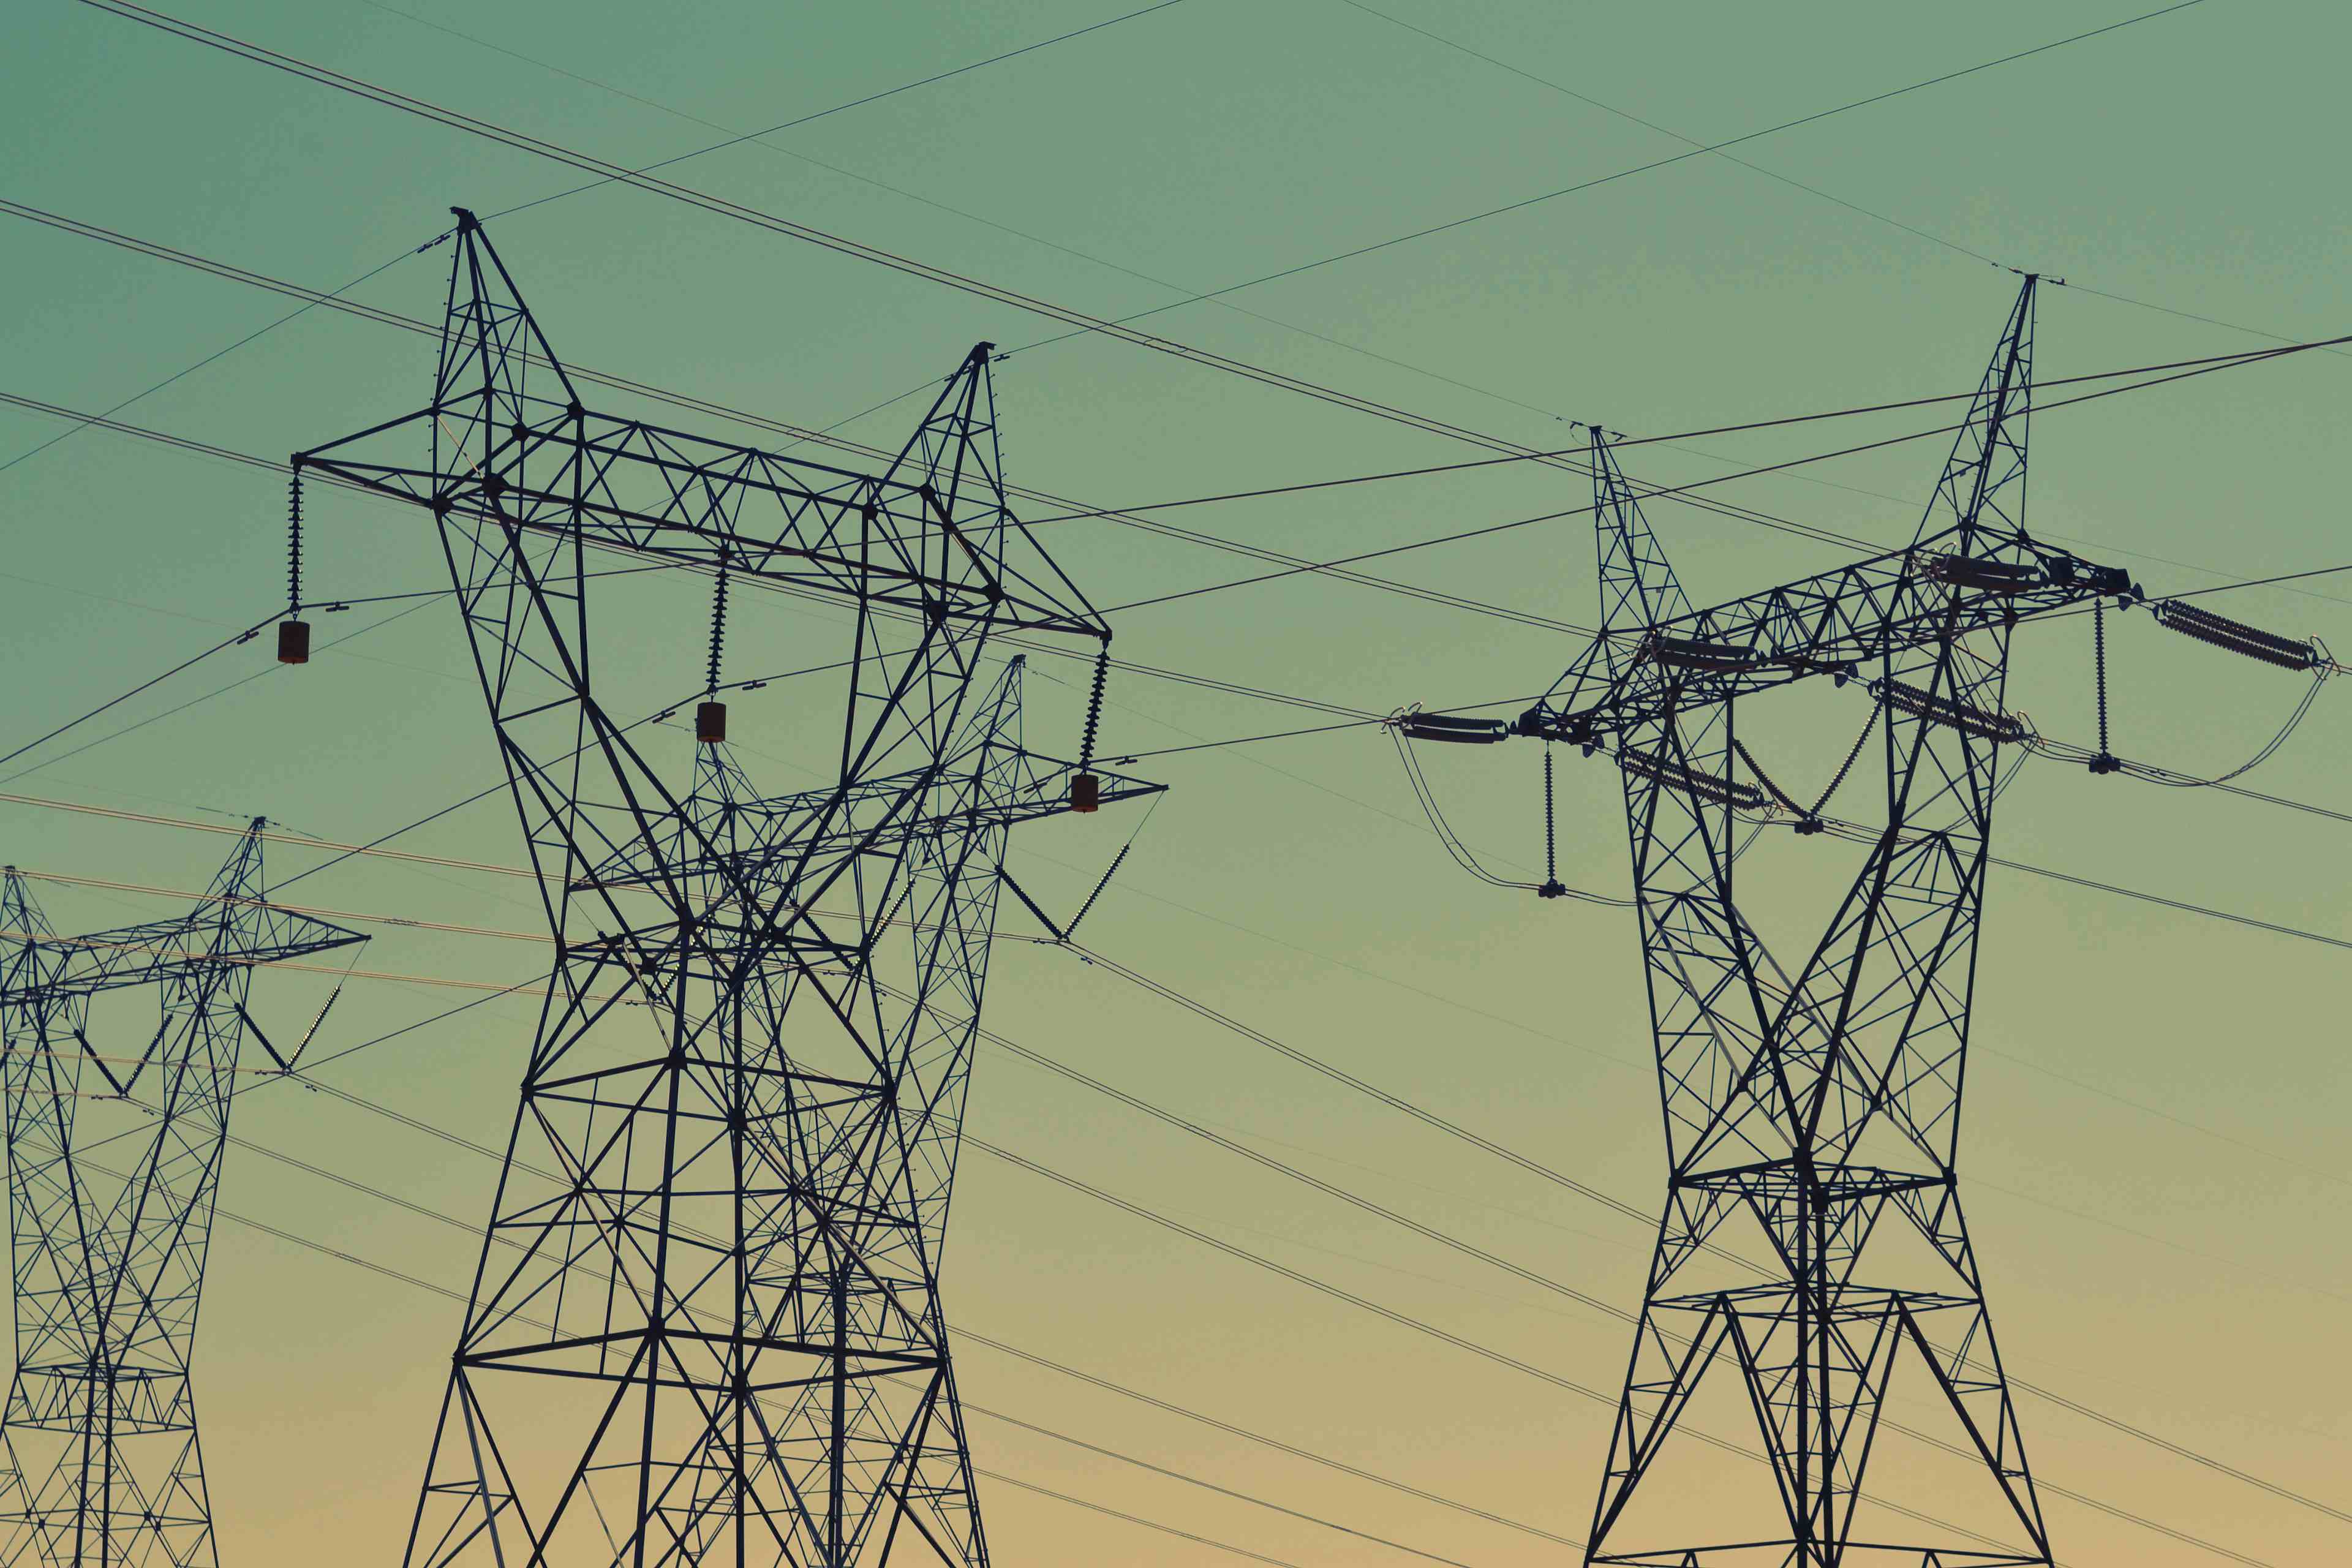 background image of overhead powerlines and towers